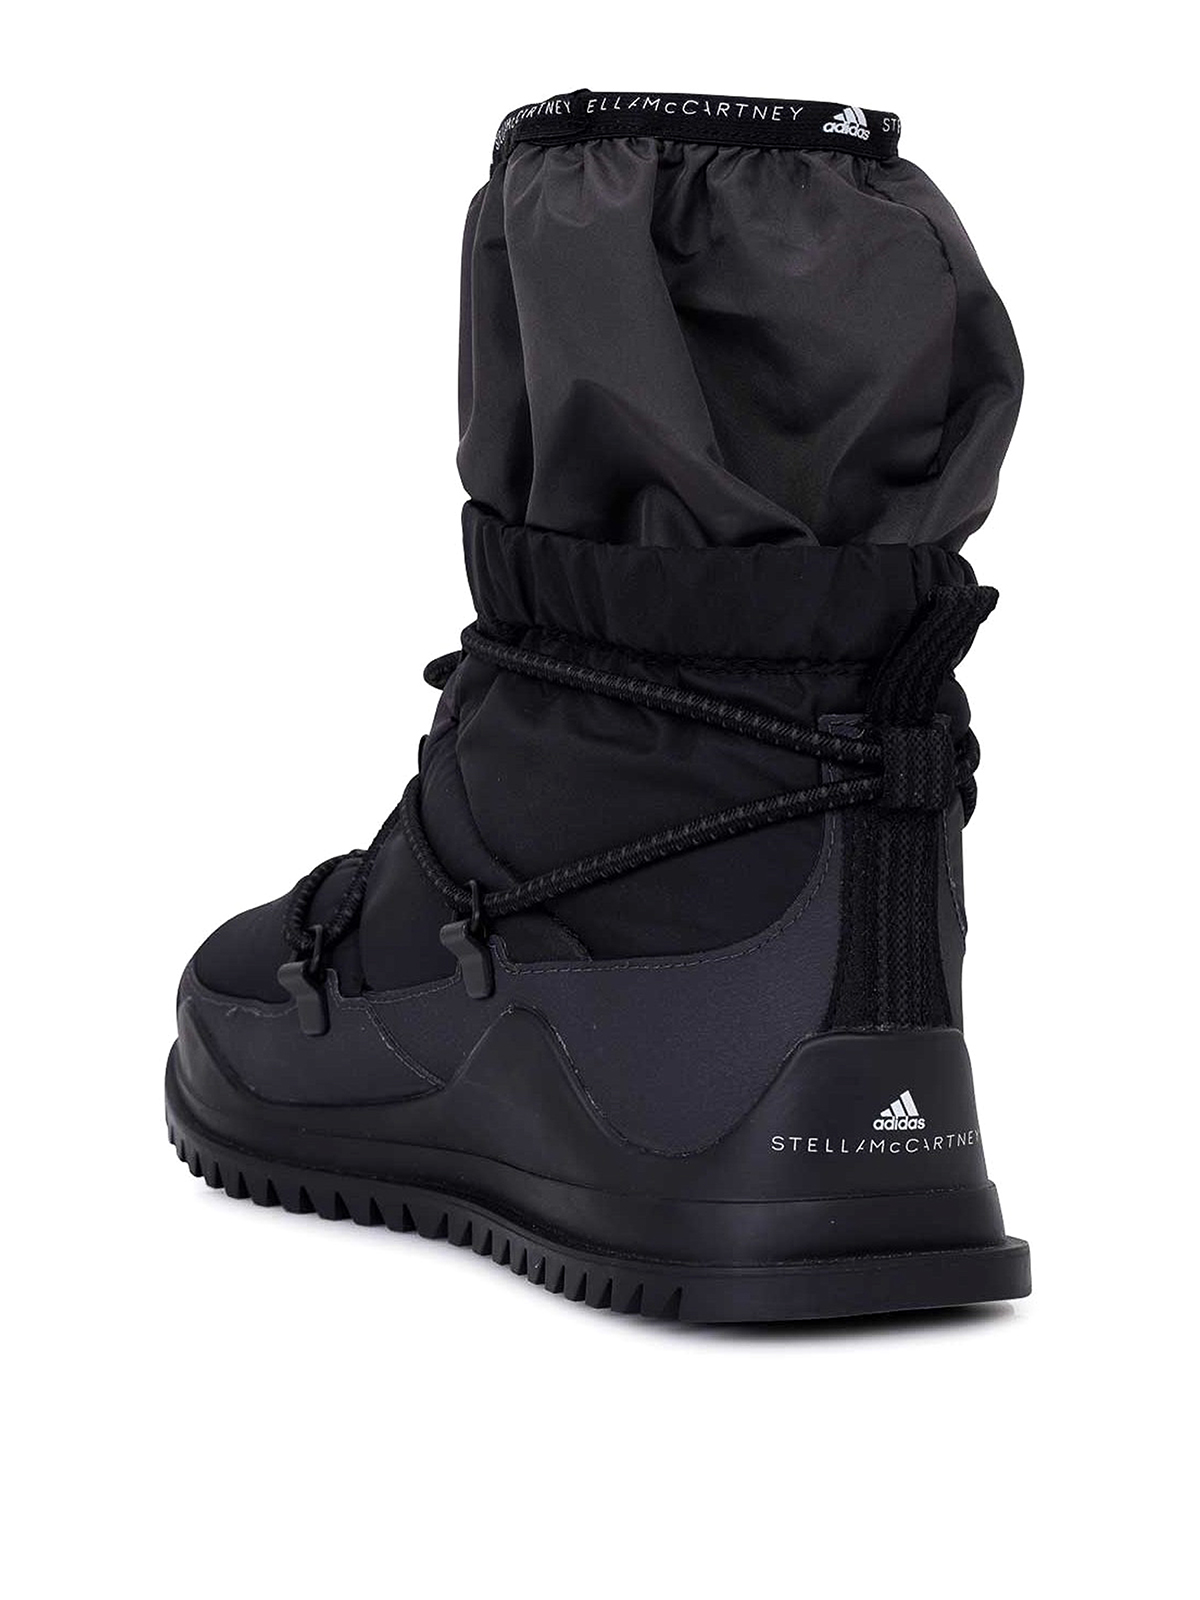 Learning Cleanly Concise Boots Adidas by Stella McCartney - Padded boots - GY4384 | iKRIX.com